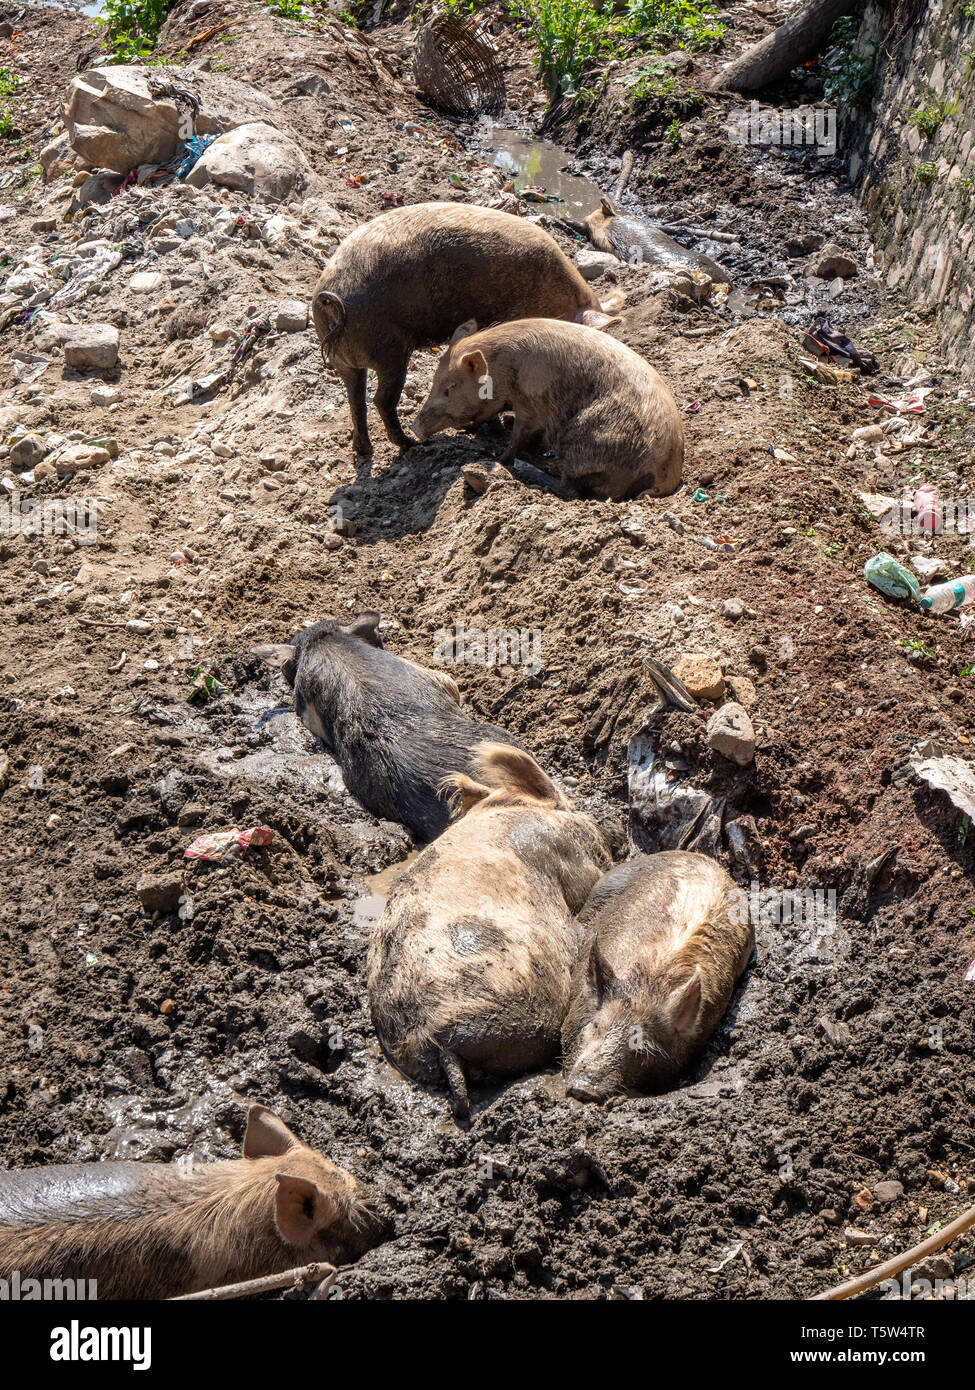 Pigs wallowing in mud by a river in northern India Stock Photo